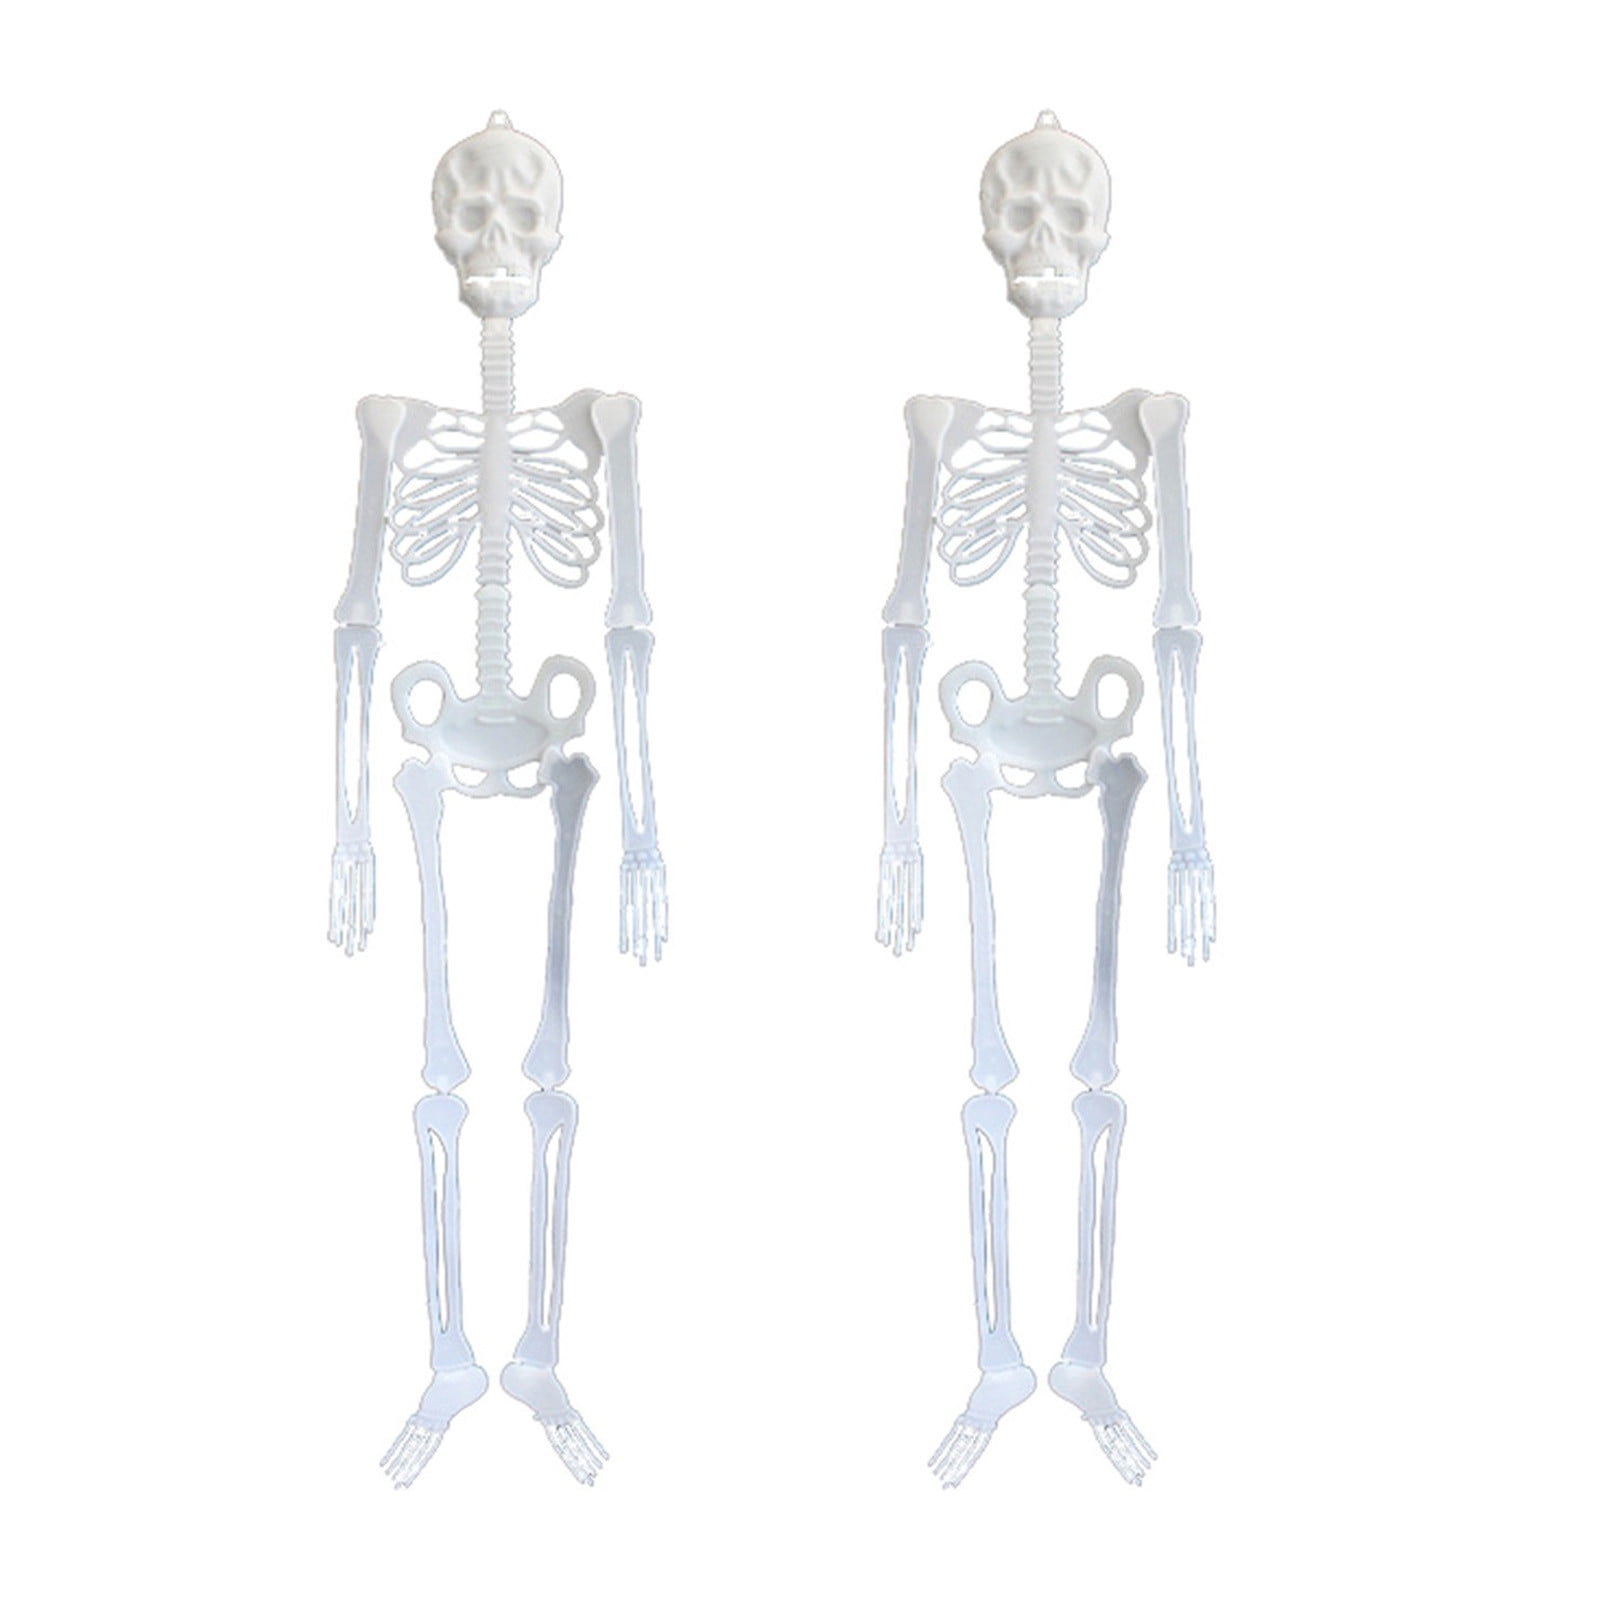 Details about   Happy Halloween Skeleton Plastic Yard Sign New!!! 